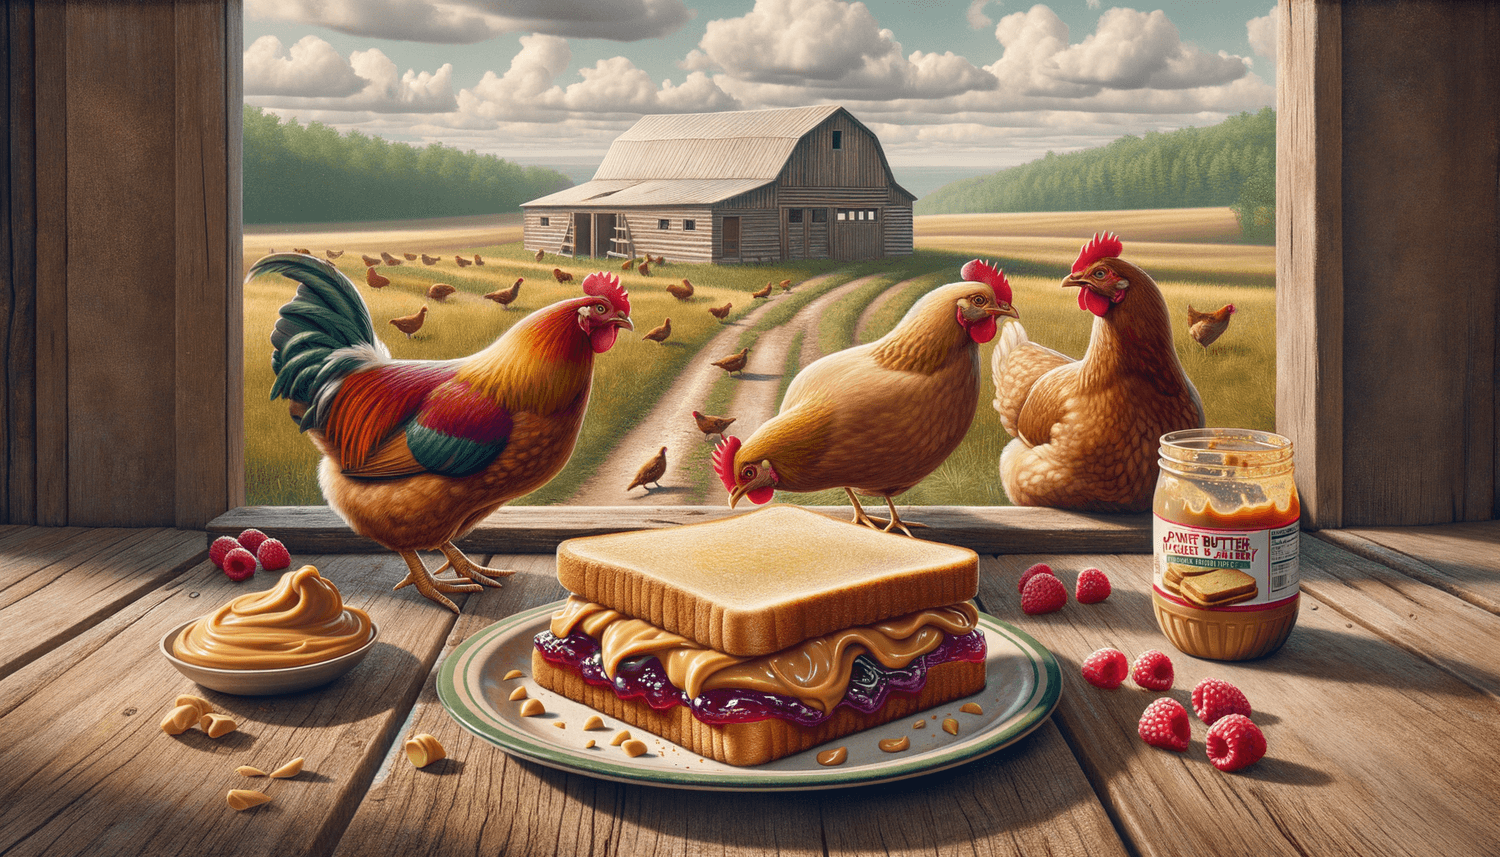 Can Chickens Eat Peanut Butter and Jelly Sandwiches?